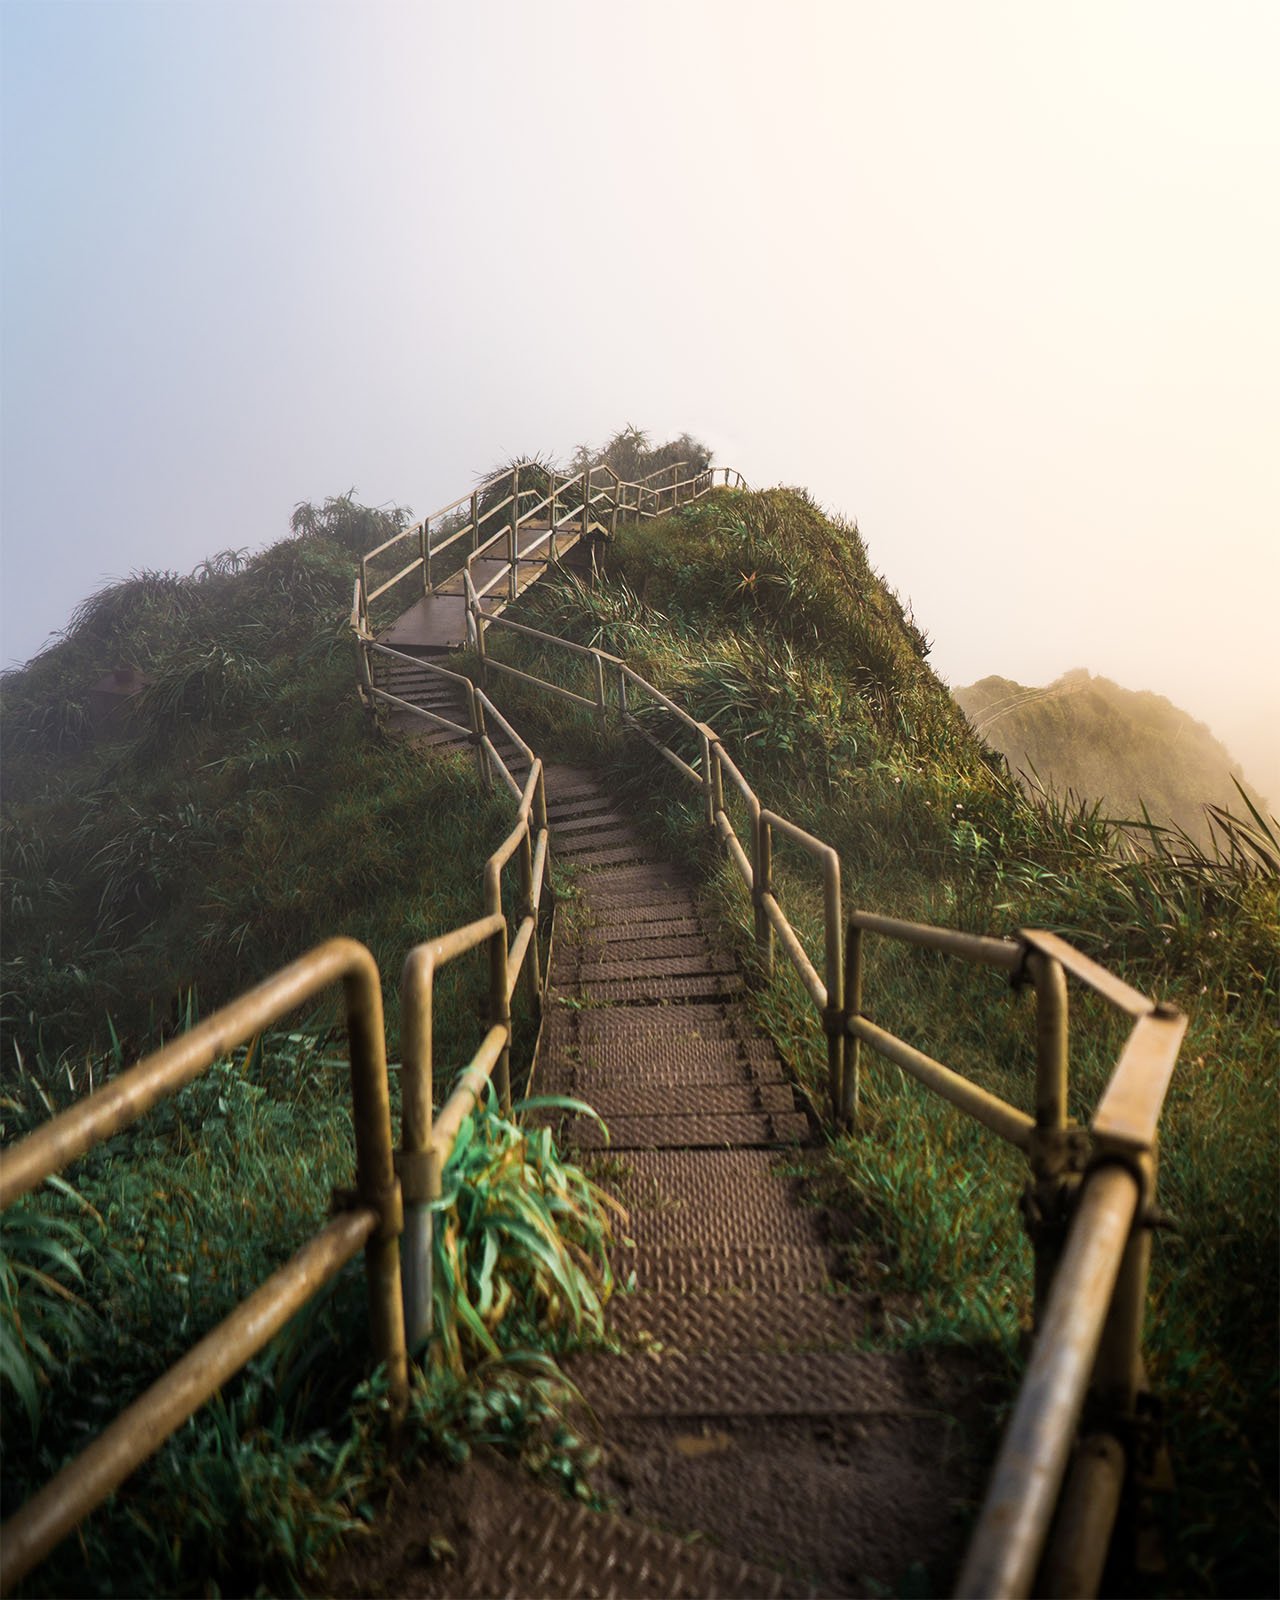 A misty mountain path with a wooden railing leads up a lush, green hillside into a foggy, sunlit horizon.